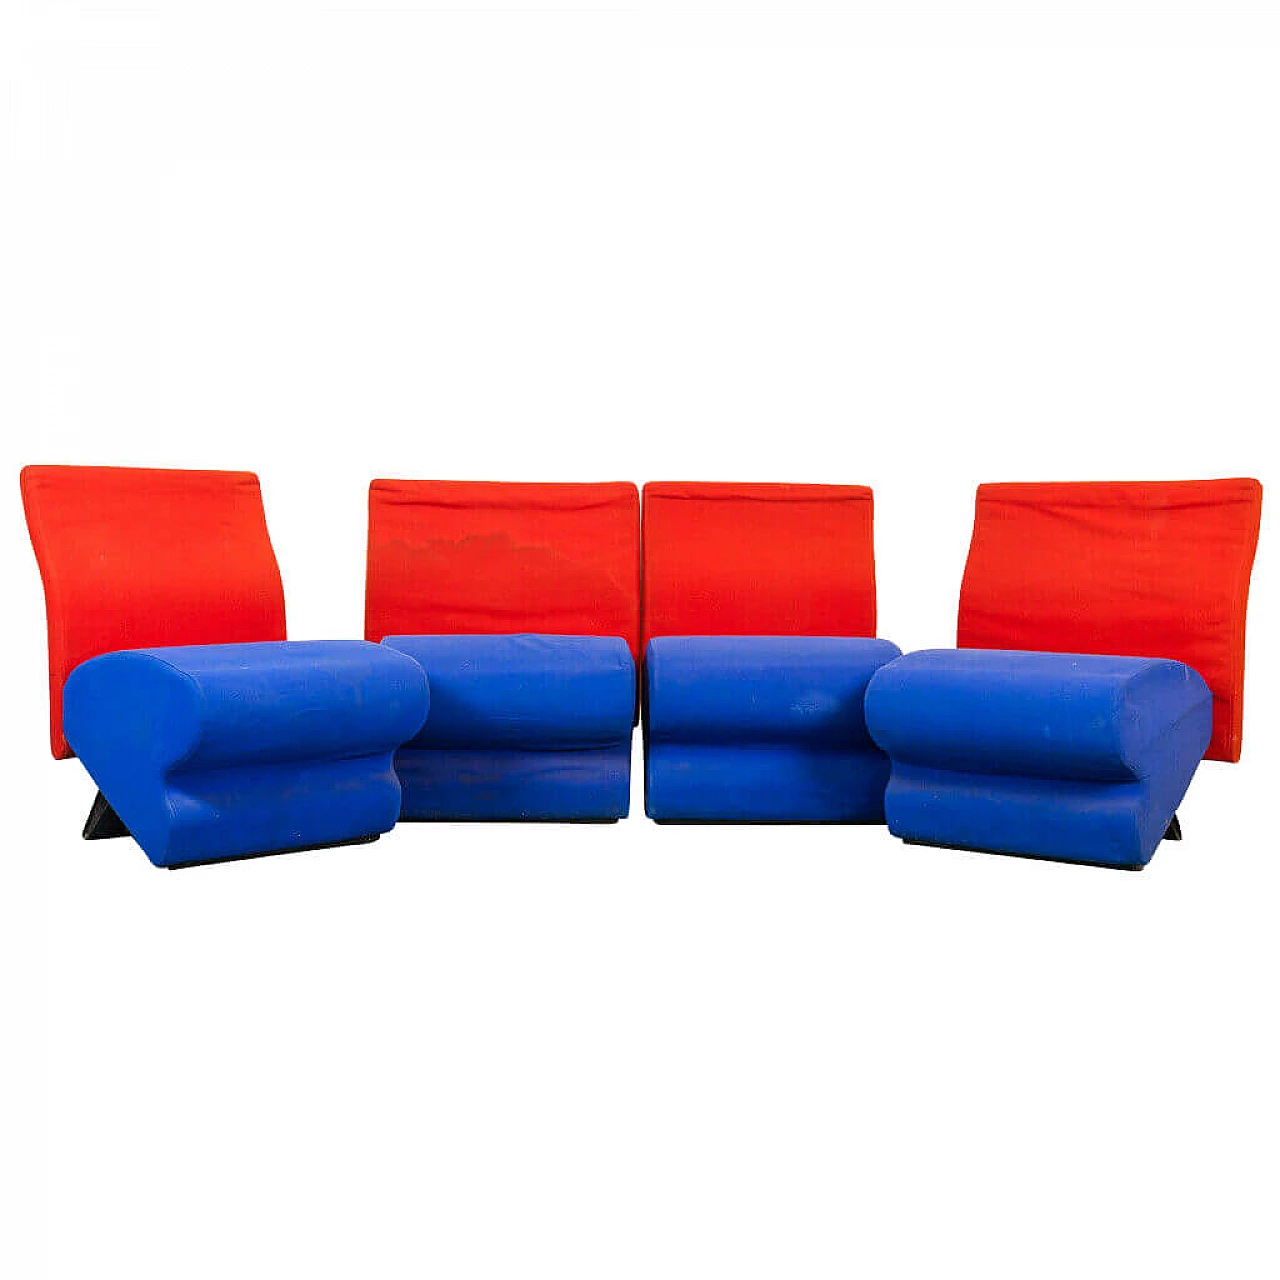 4 Red and blue armchairs, 80s 1200144